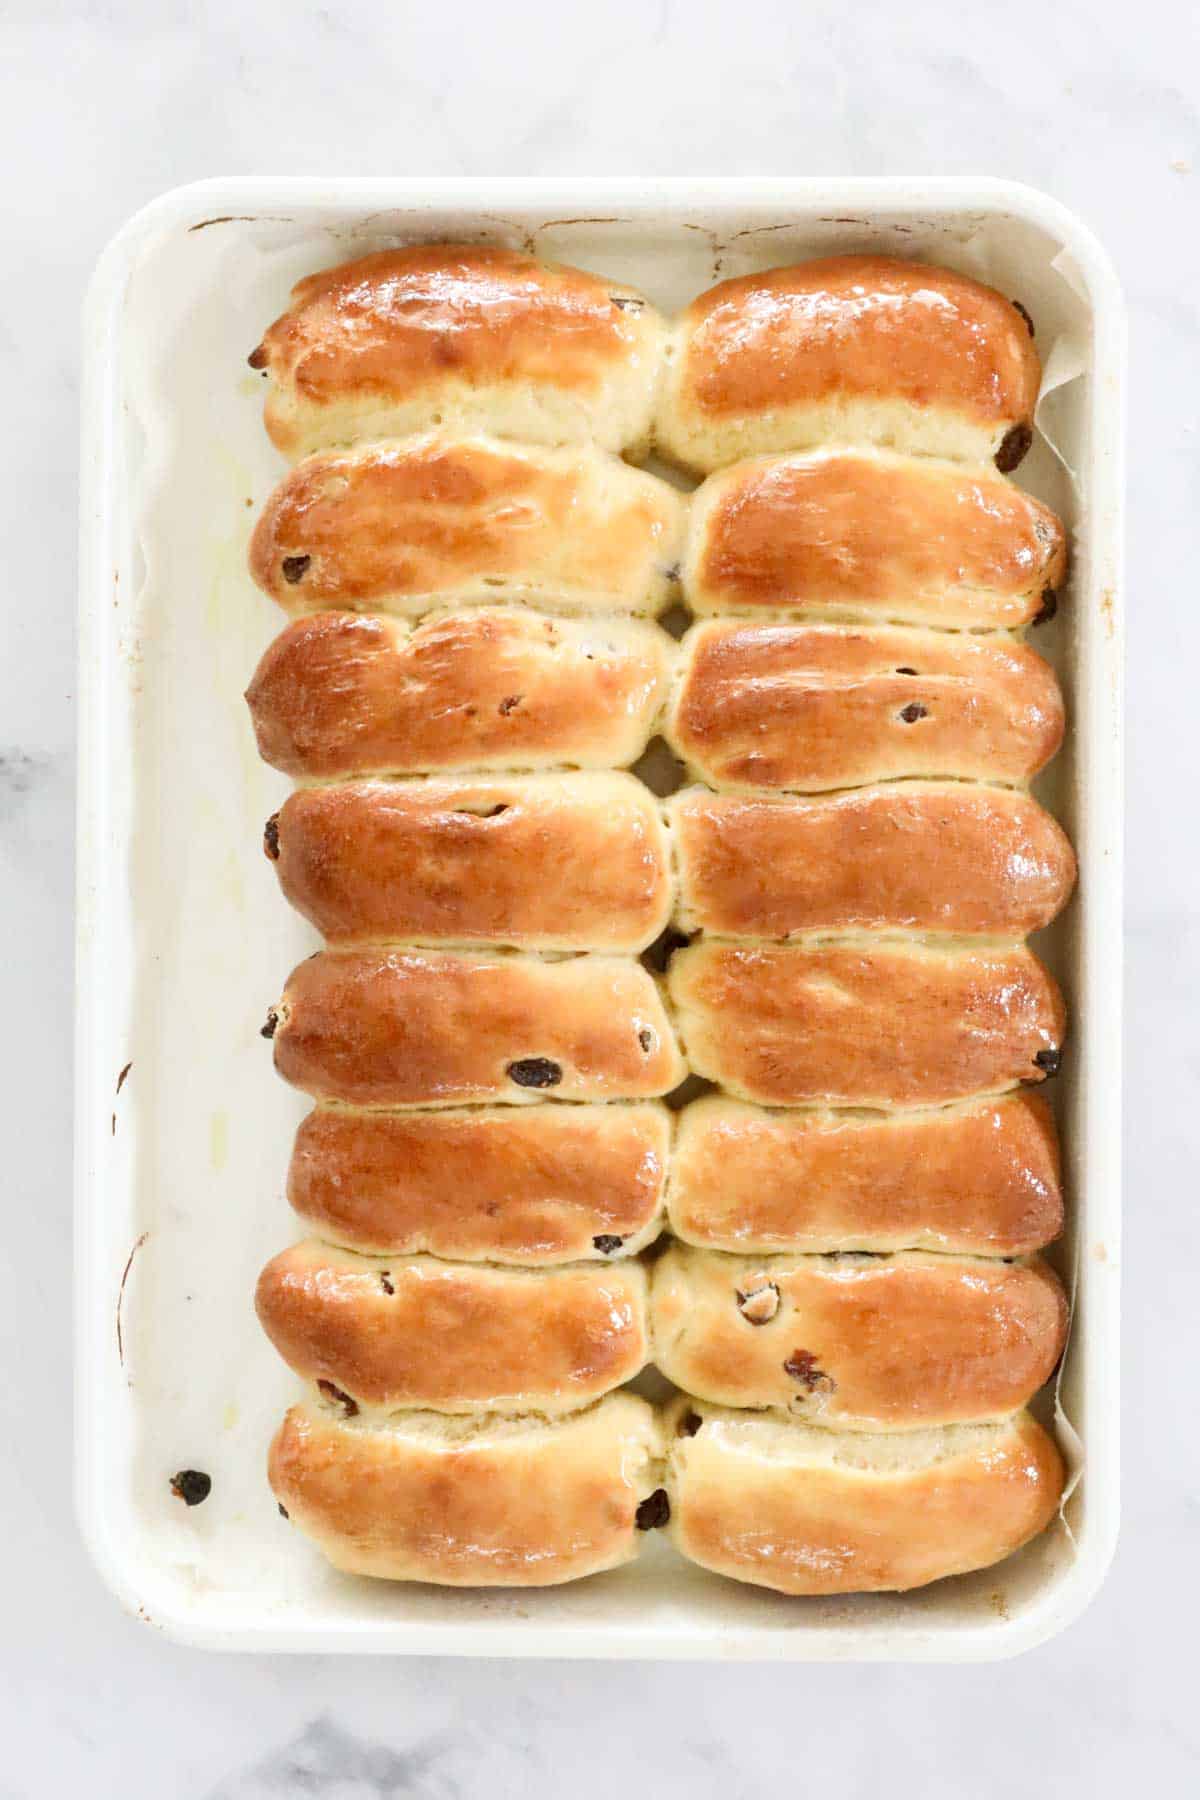 The baked finger buns in the baking dish.